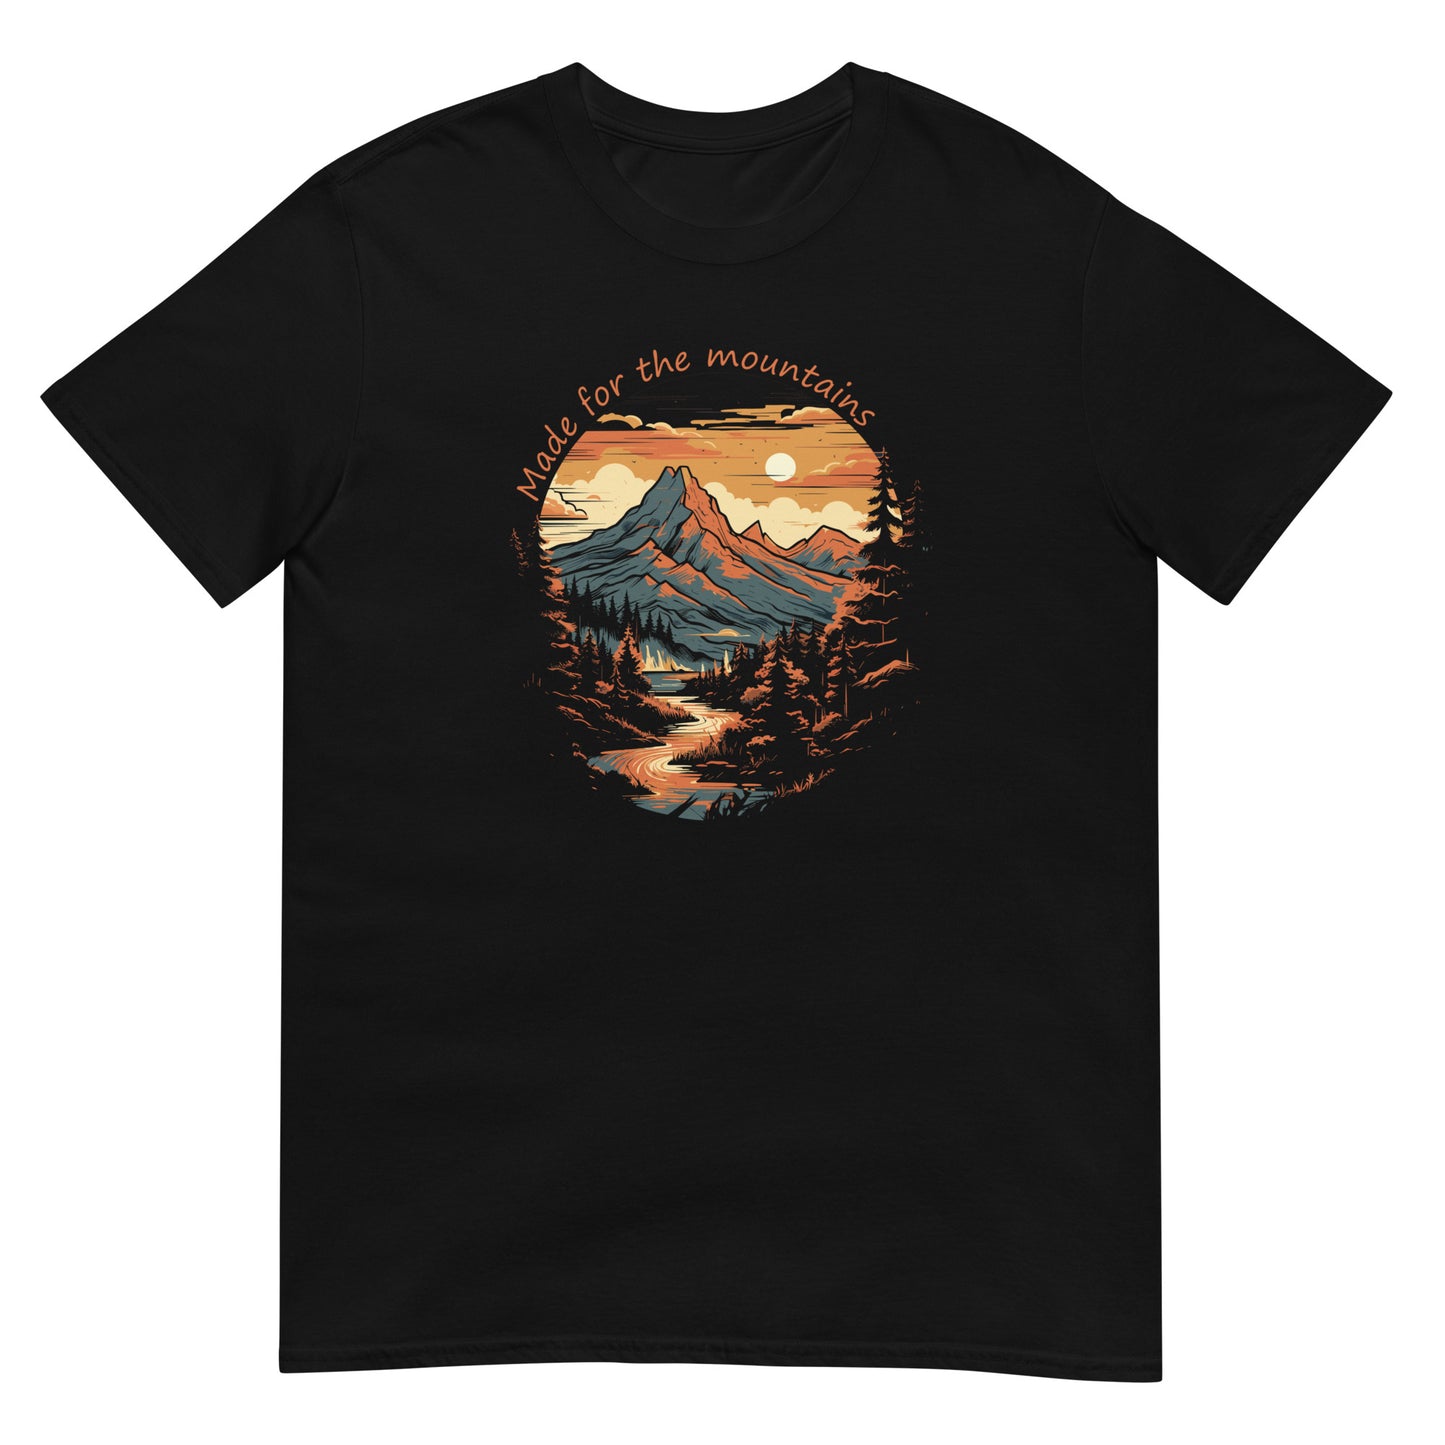 Unisex T-shirt: "Made for the mountains" 1